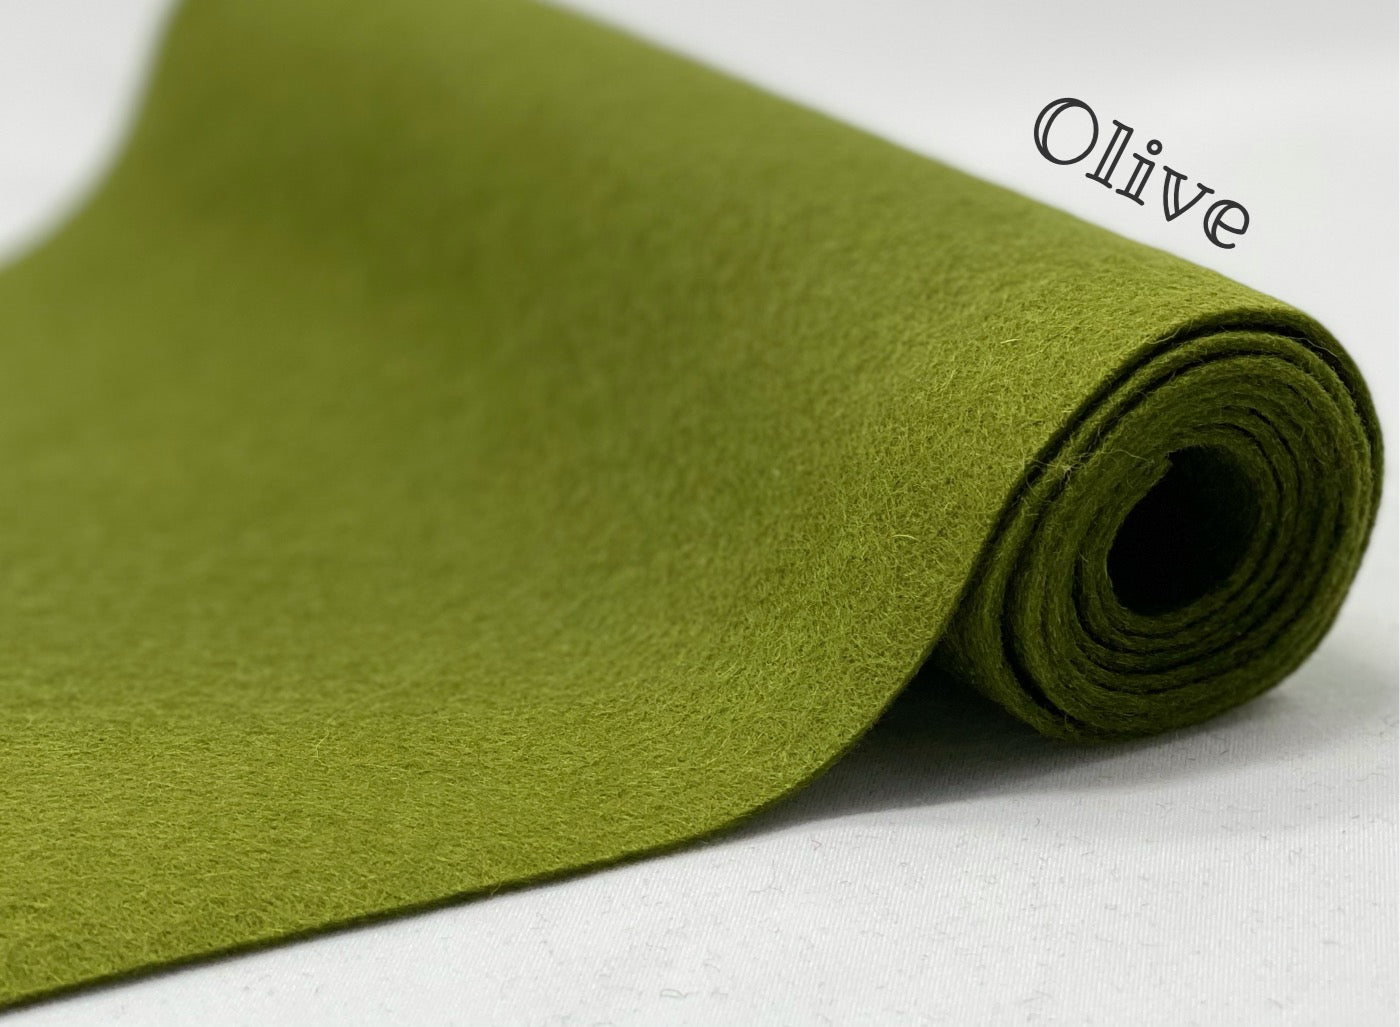 National Nonwovens Moss Green Felt - Wool Felt Giant Green Felt Sheet - 35% Wool Blend - DIY, Sewing, and Felting - National Nonwoven - Made in The USA - 1 12x18 inch